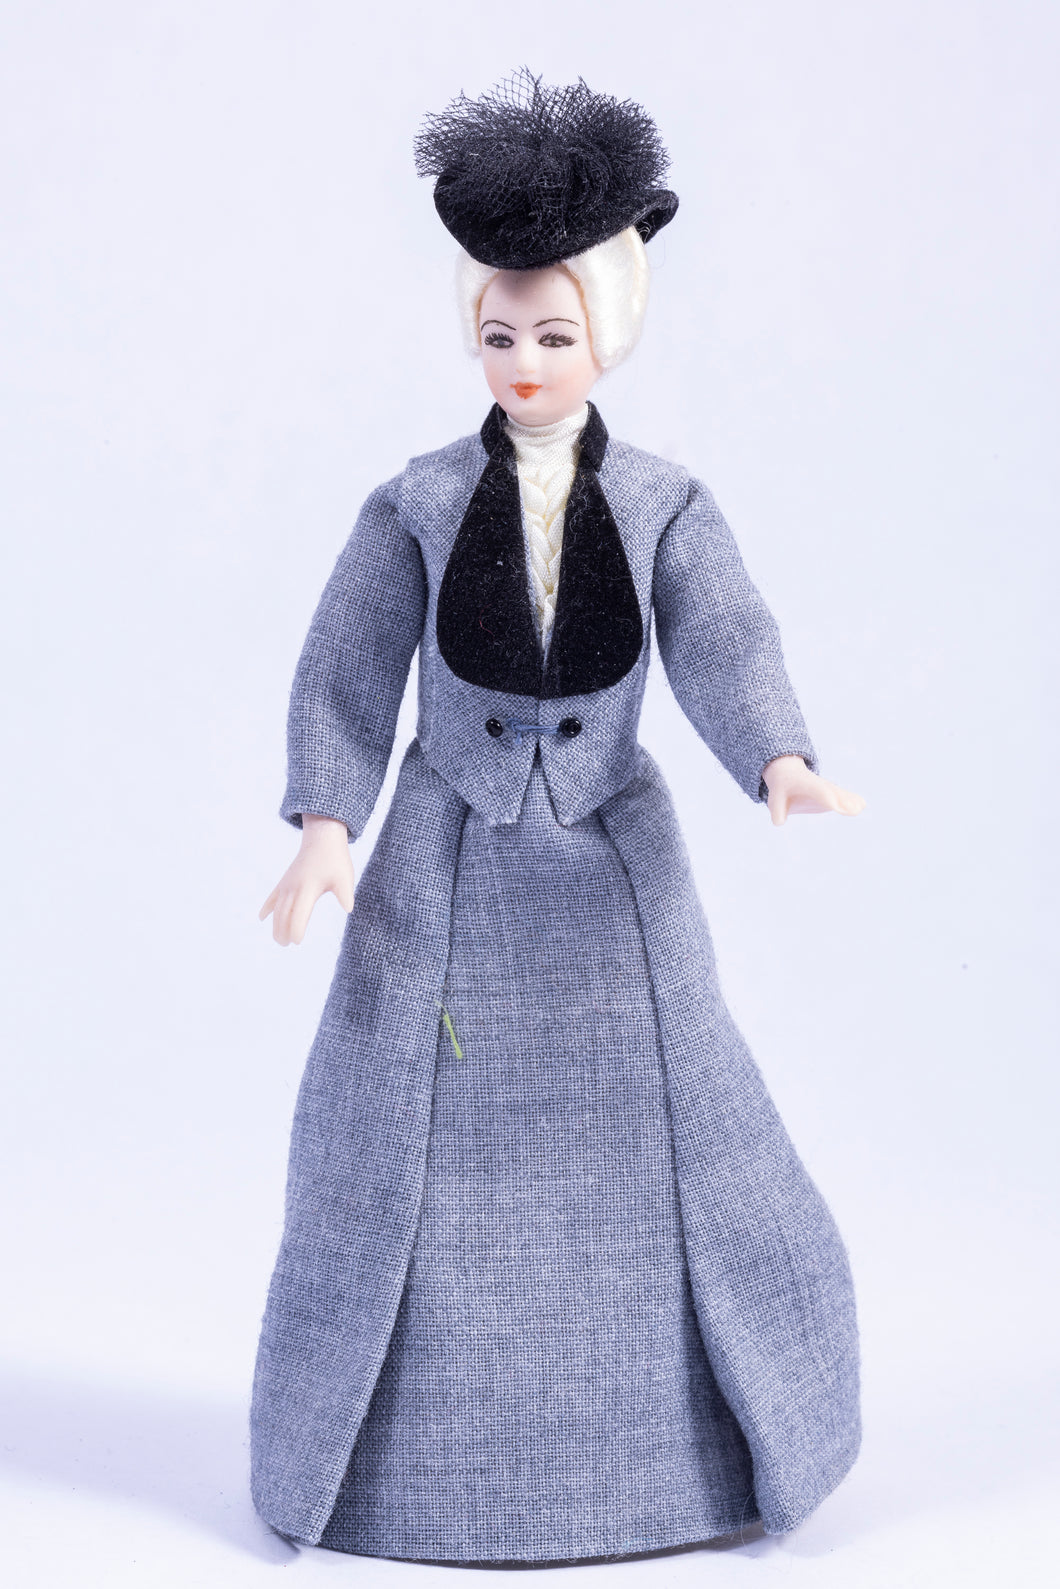 Handmade Porcelain Doll in Beautiful Suit with Hat - Victorian Era